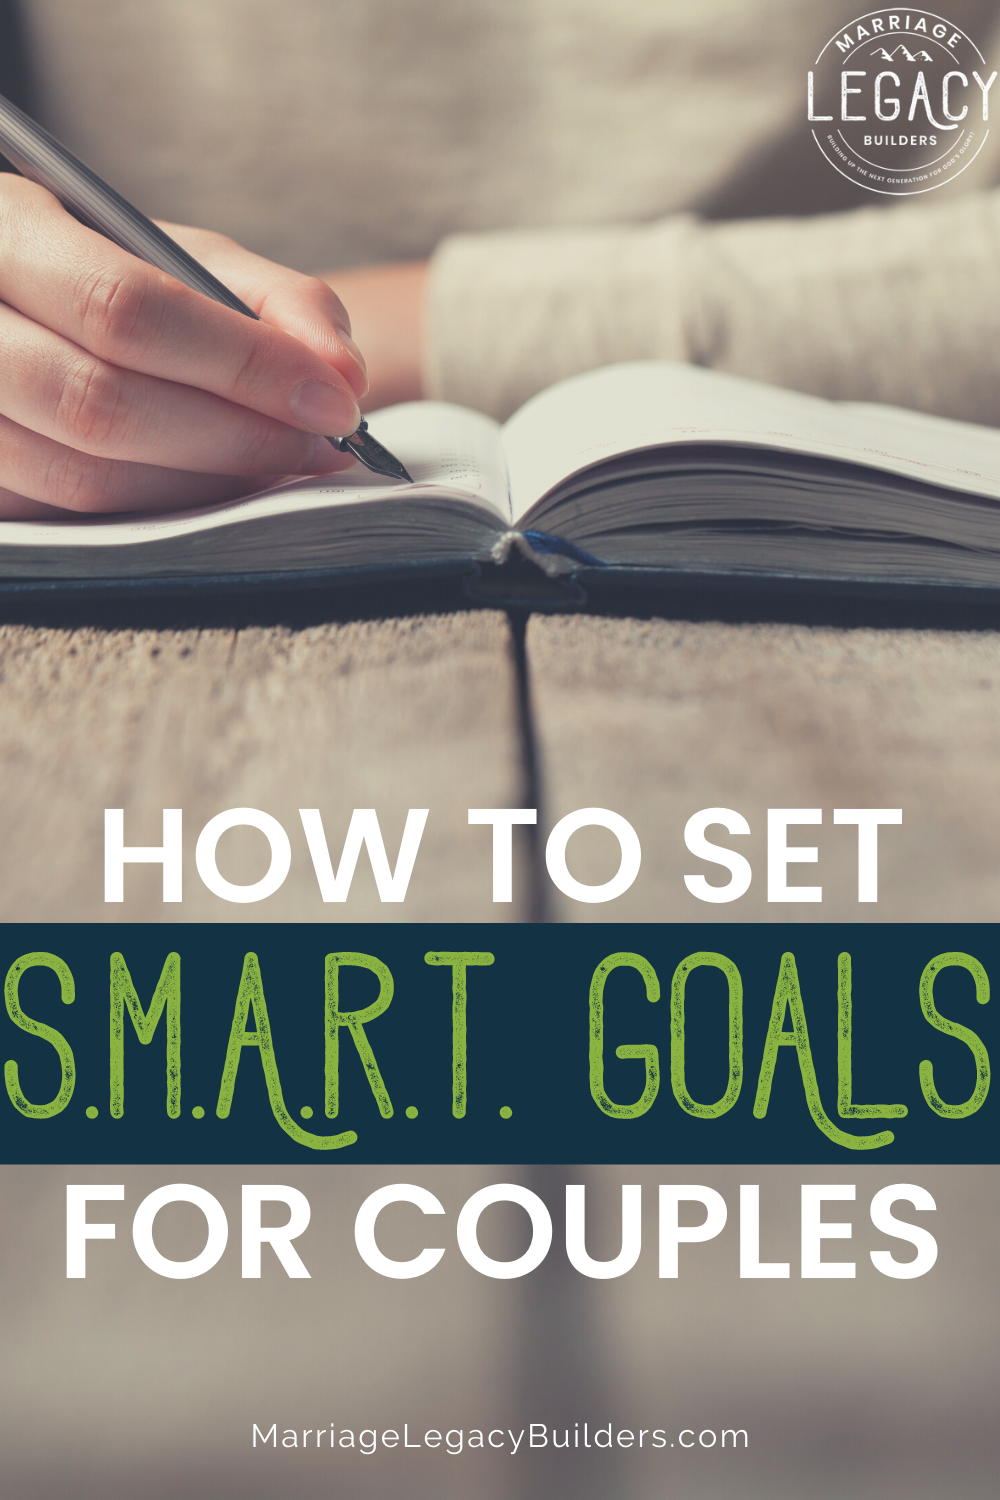 How to Set S.M.A.R.T. Goals for Couples